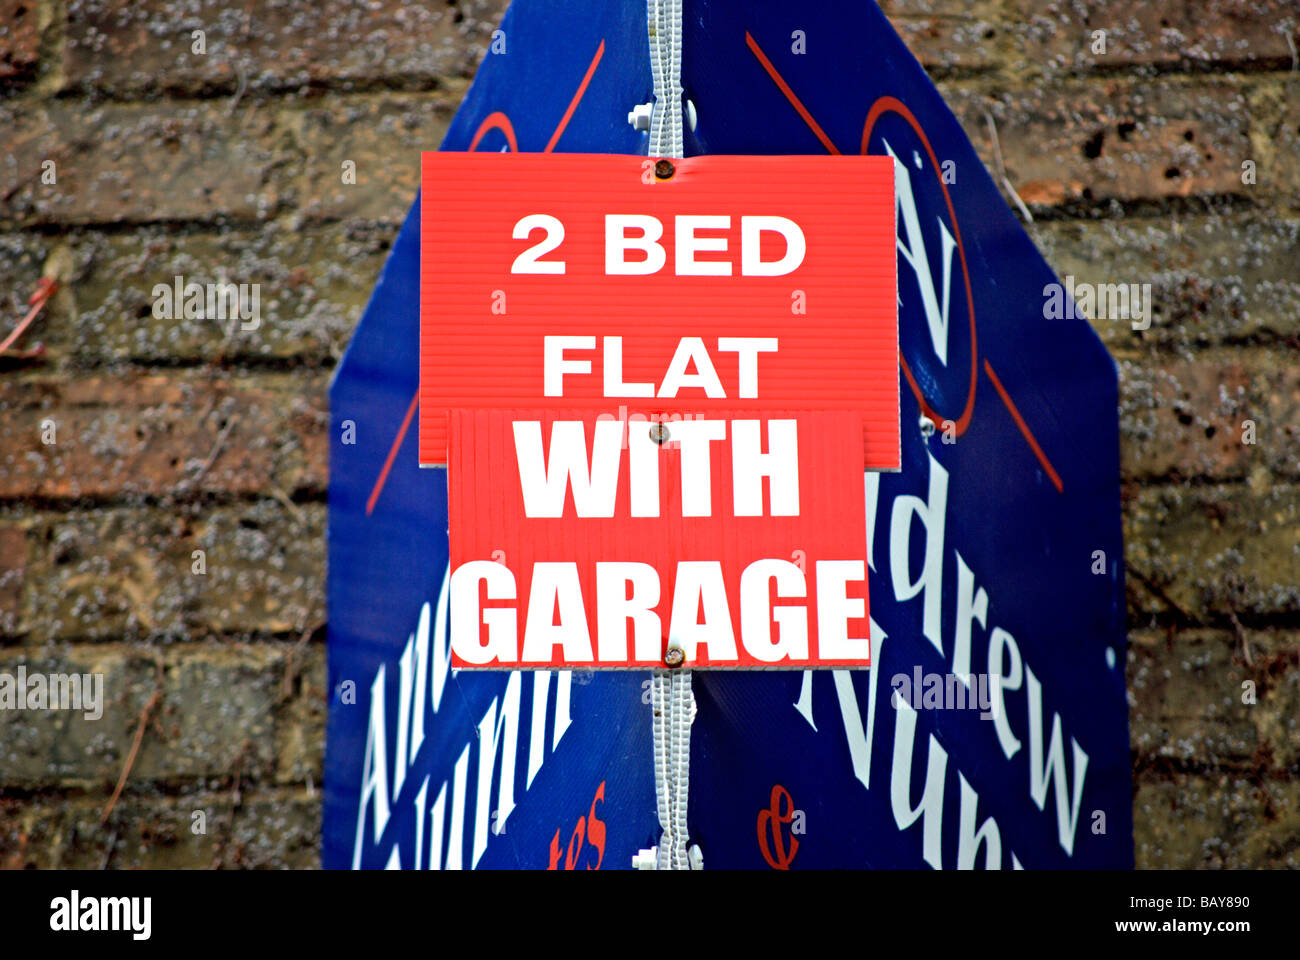 british estate agents sign for 2 bedroom flat with garage Stock Photo